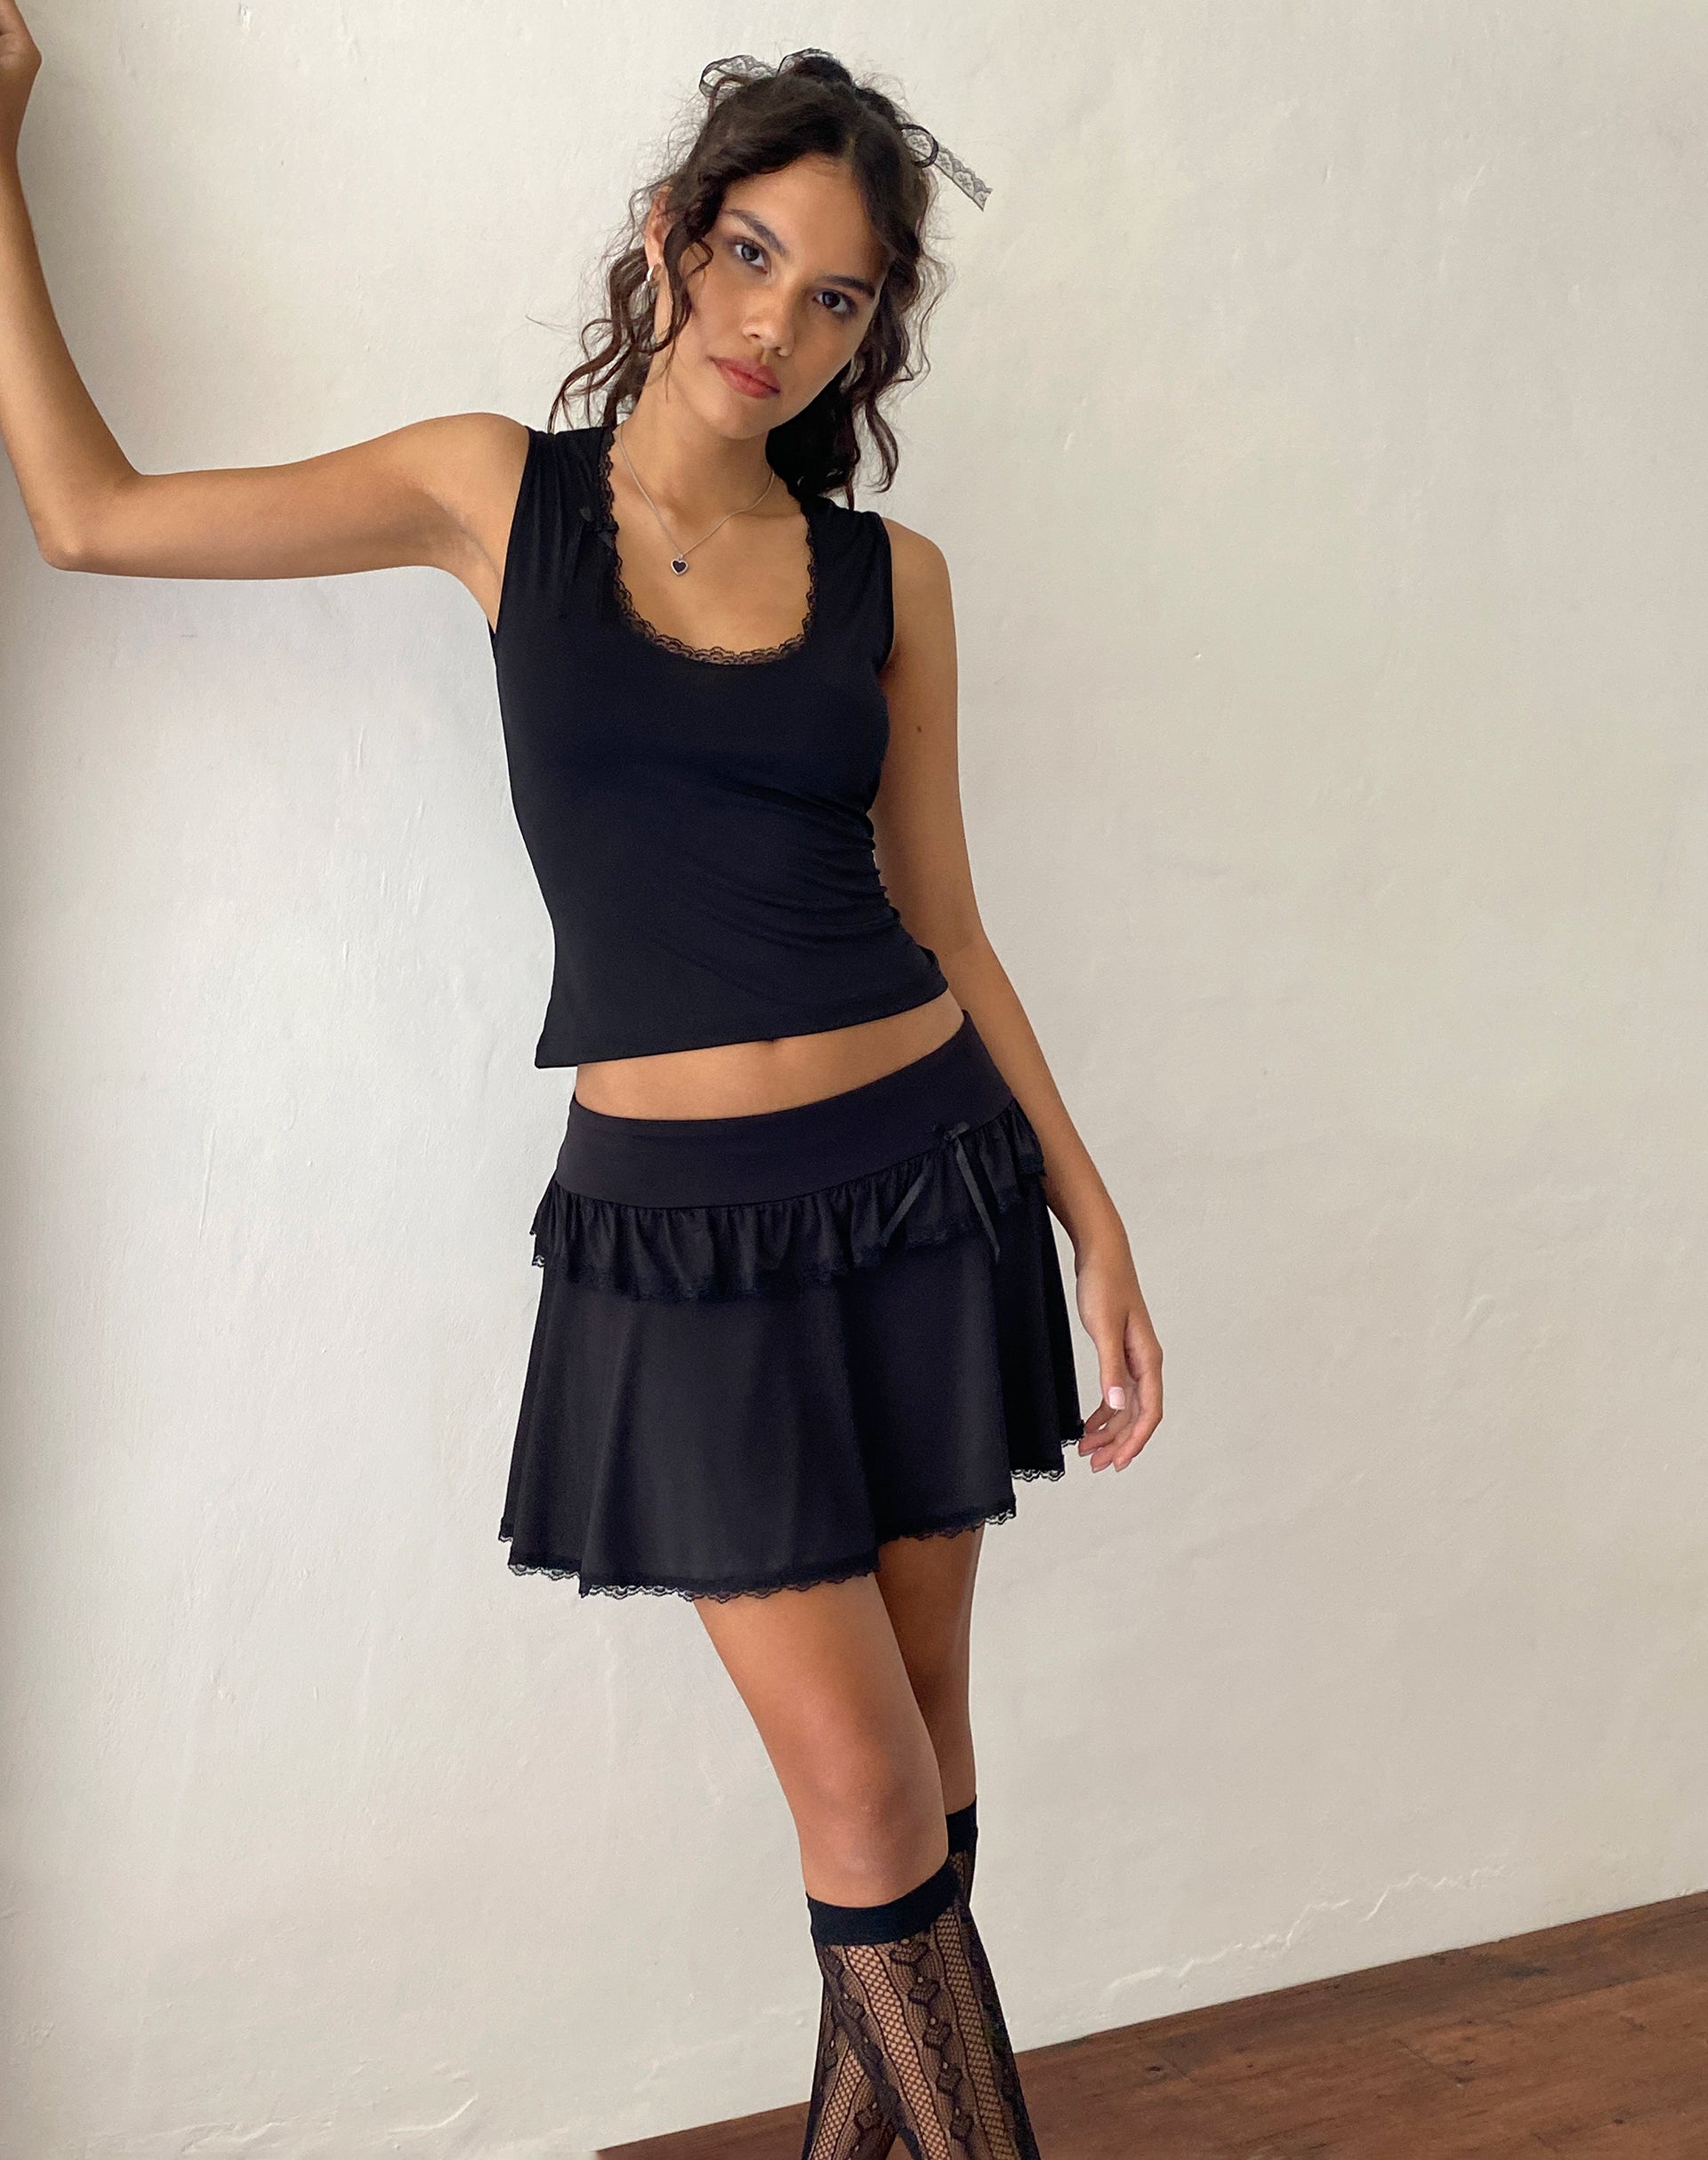 Image of Addalyn Lace Trim Mini Skirt in Black